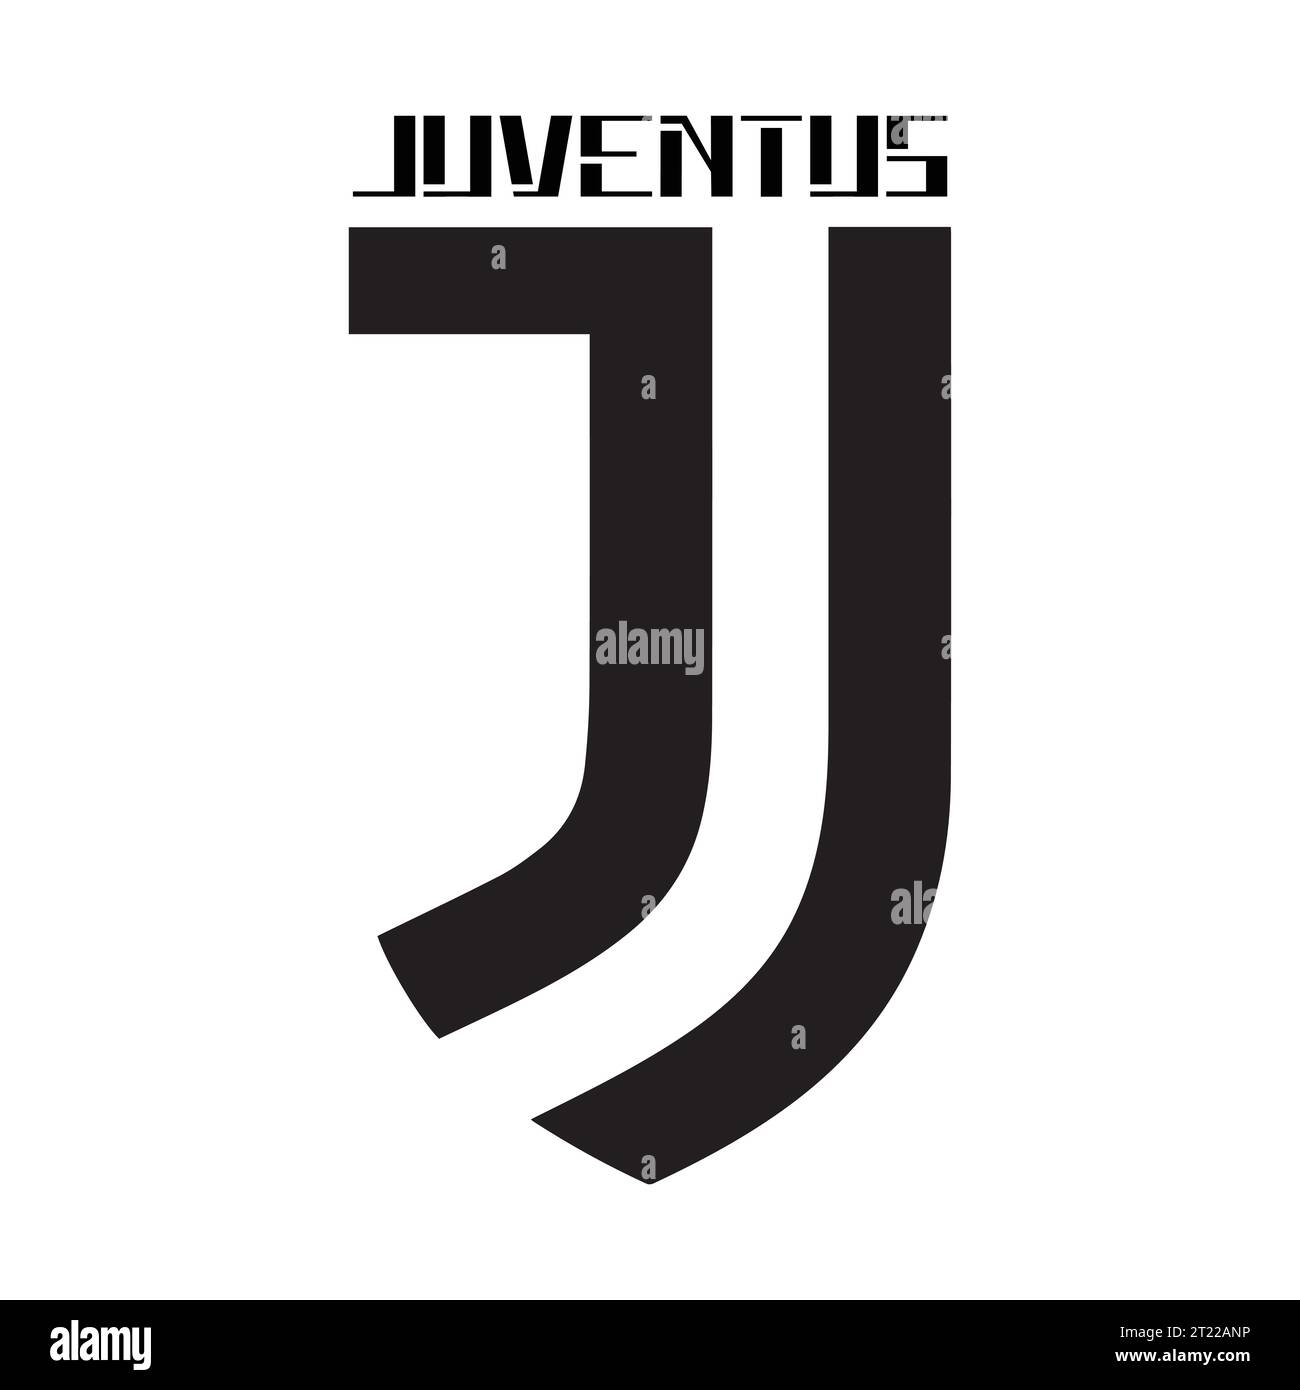 Juventus FC Black and White Logo Italian professional football club, Vector Illustration Abstract Black and White Editable image Stock Vector